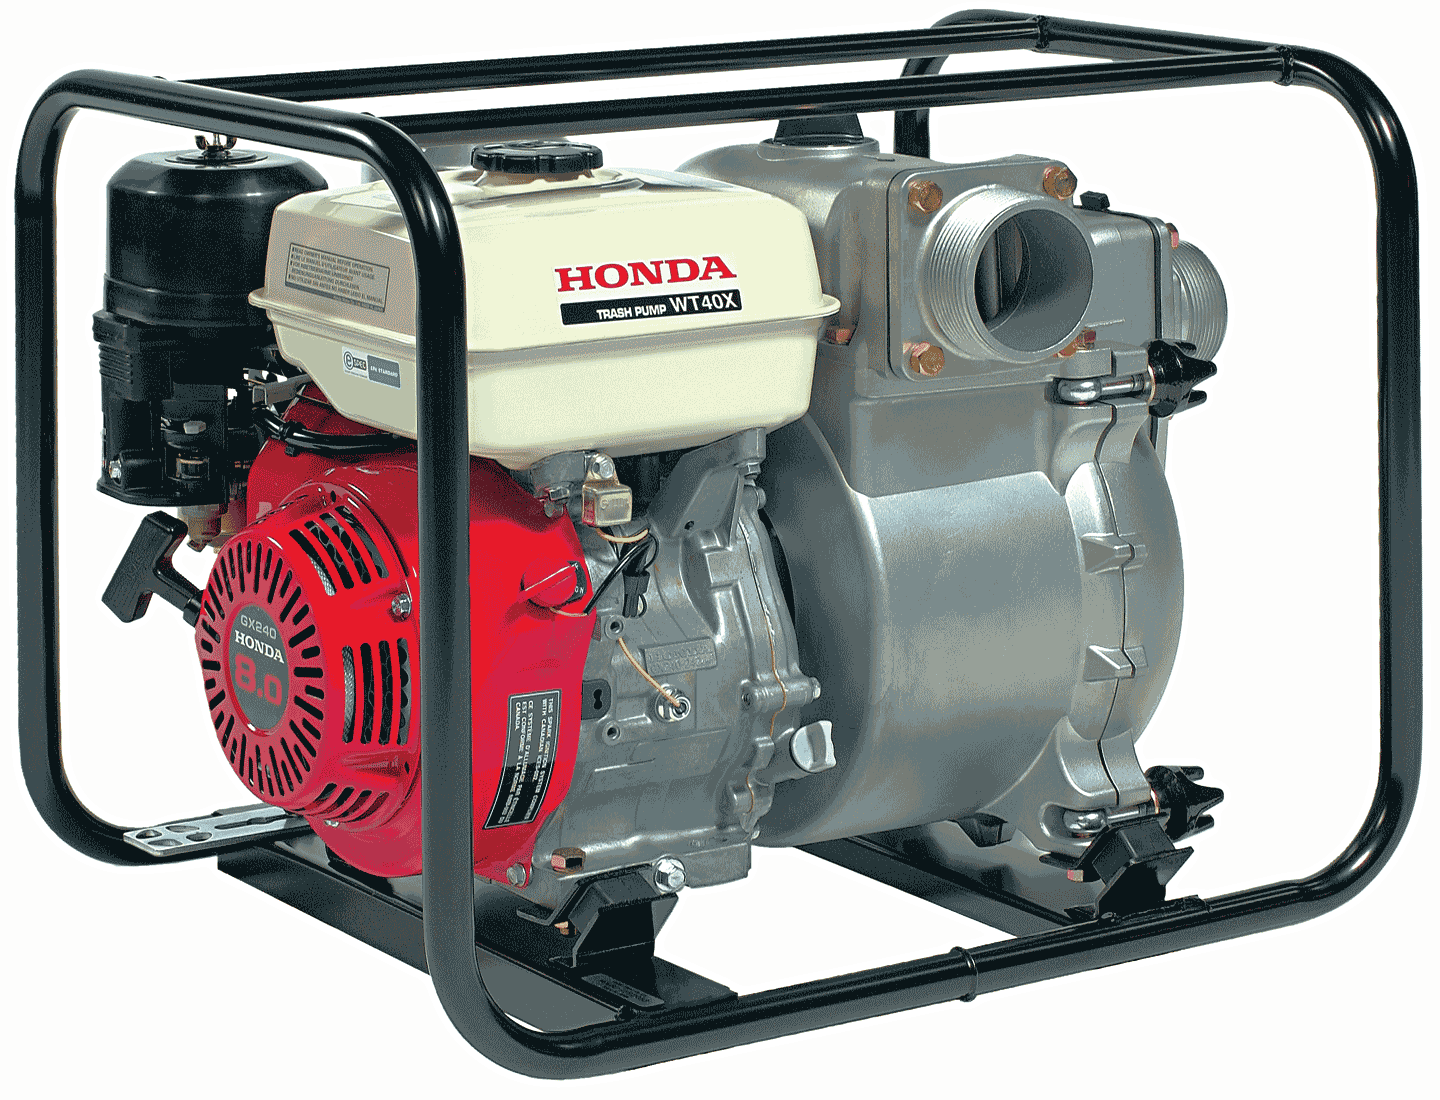 Honda water pumps prices in india #5